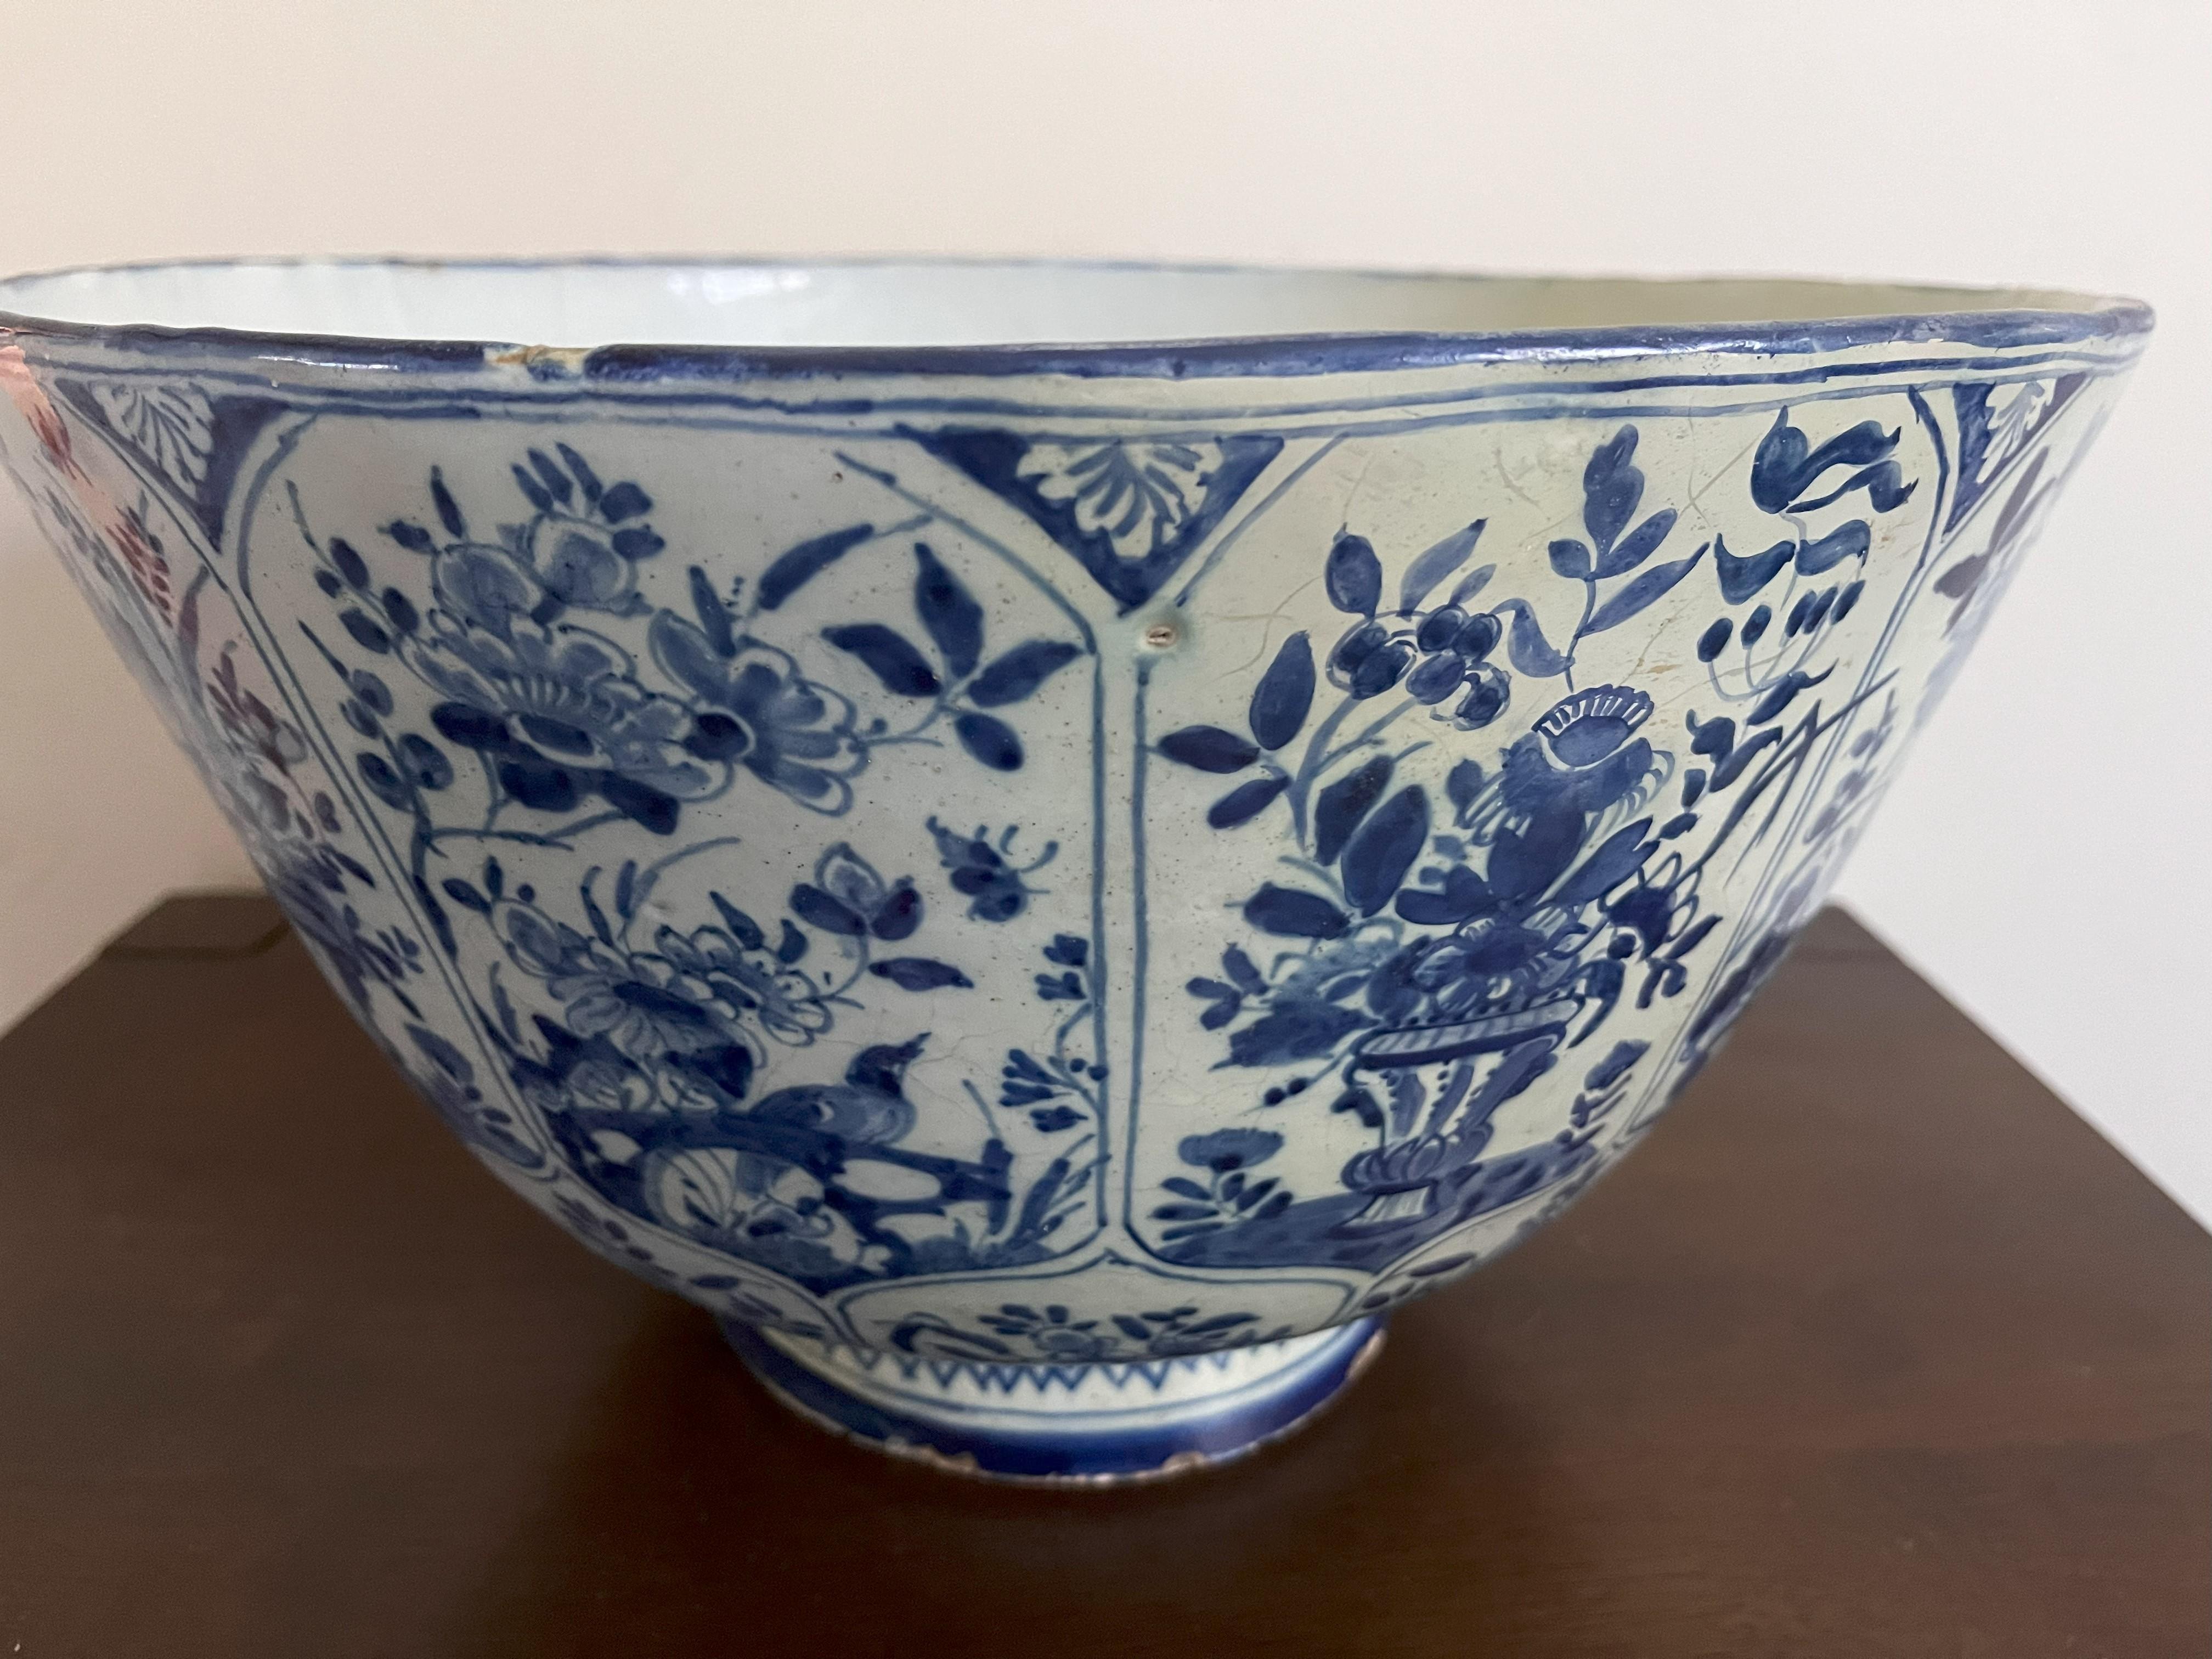 A large (14 inch / 35 cm diameter) antique Blue and White Delft punch bowl made in the 18th century, circa 1745. Probably English due to extensive flowery decoration and the reddish clay that is visible in the blemishes. 